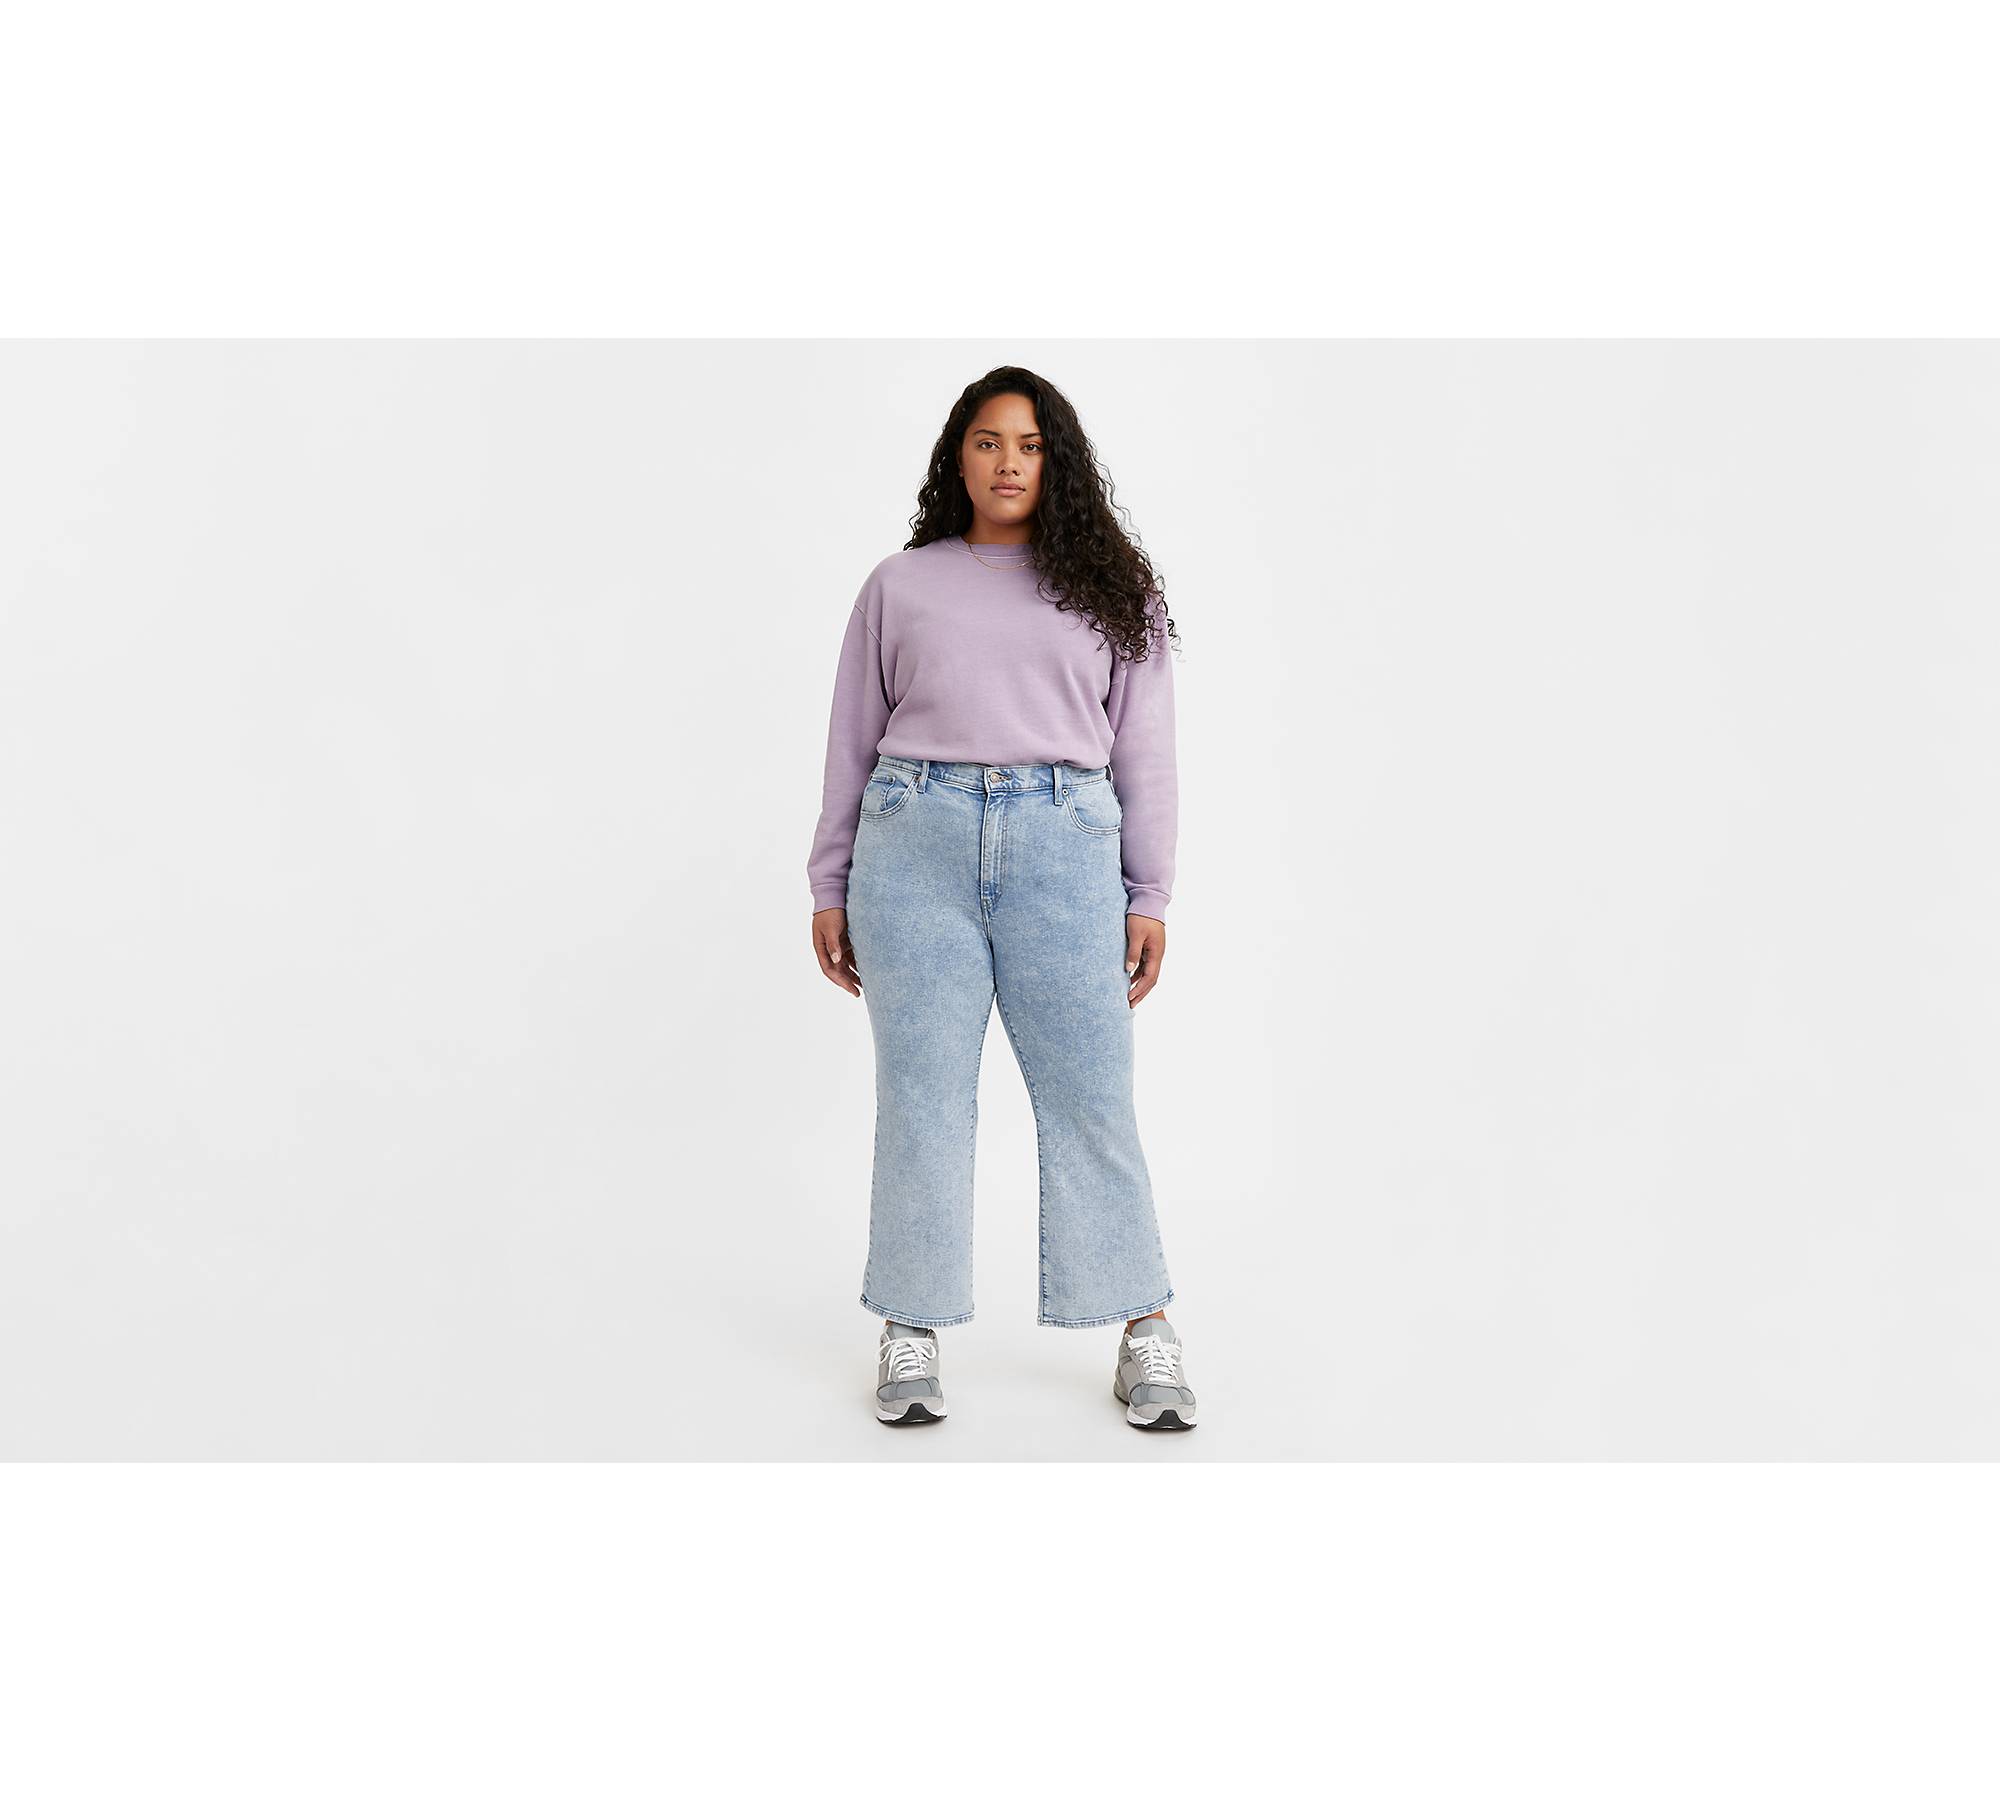 7 Rules for Wearing Cropped Flare Jeans  Cropped flares, Cropped flare  jeans, Flare jeans